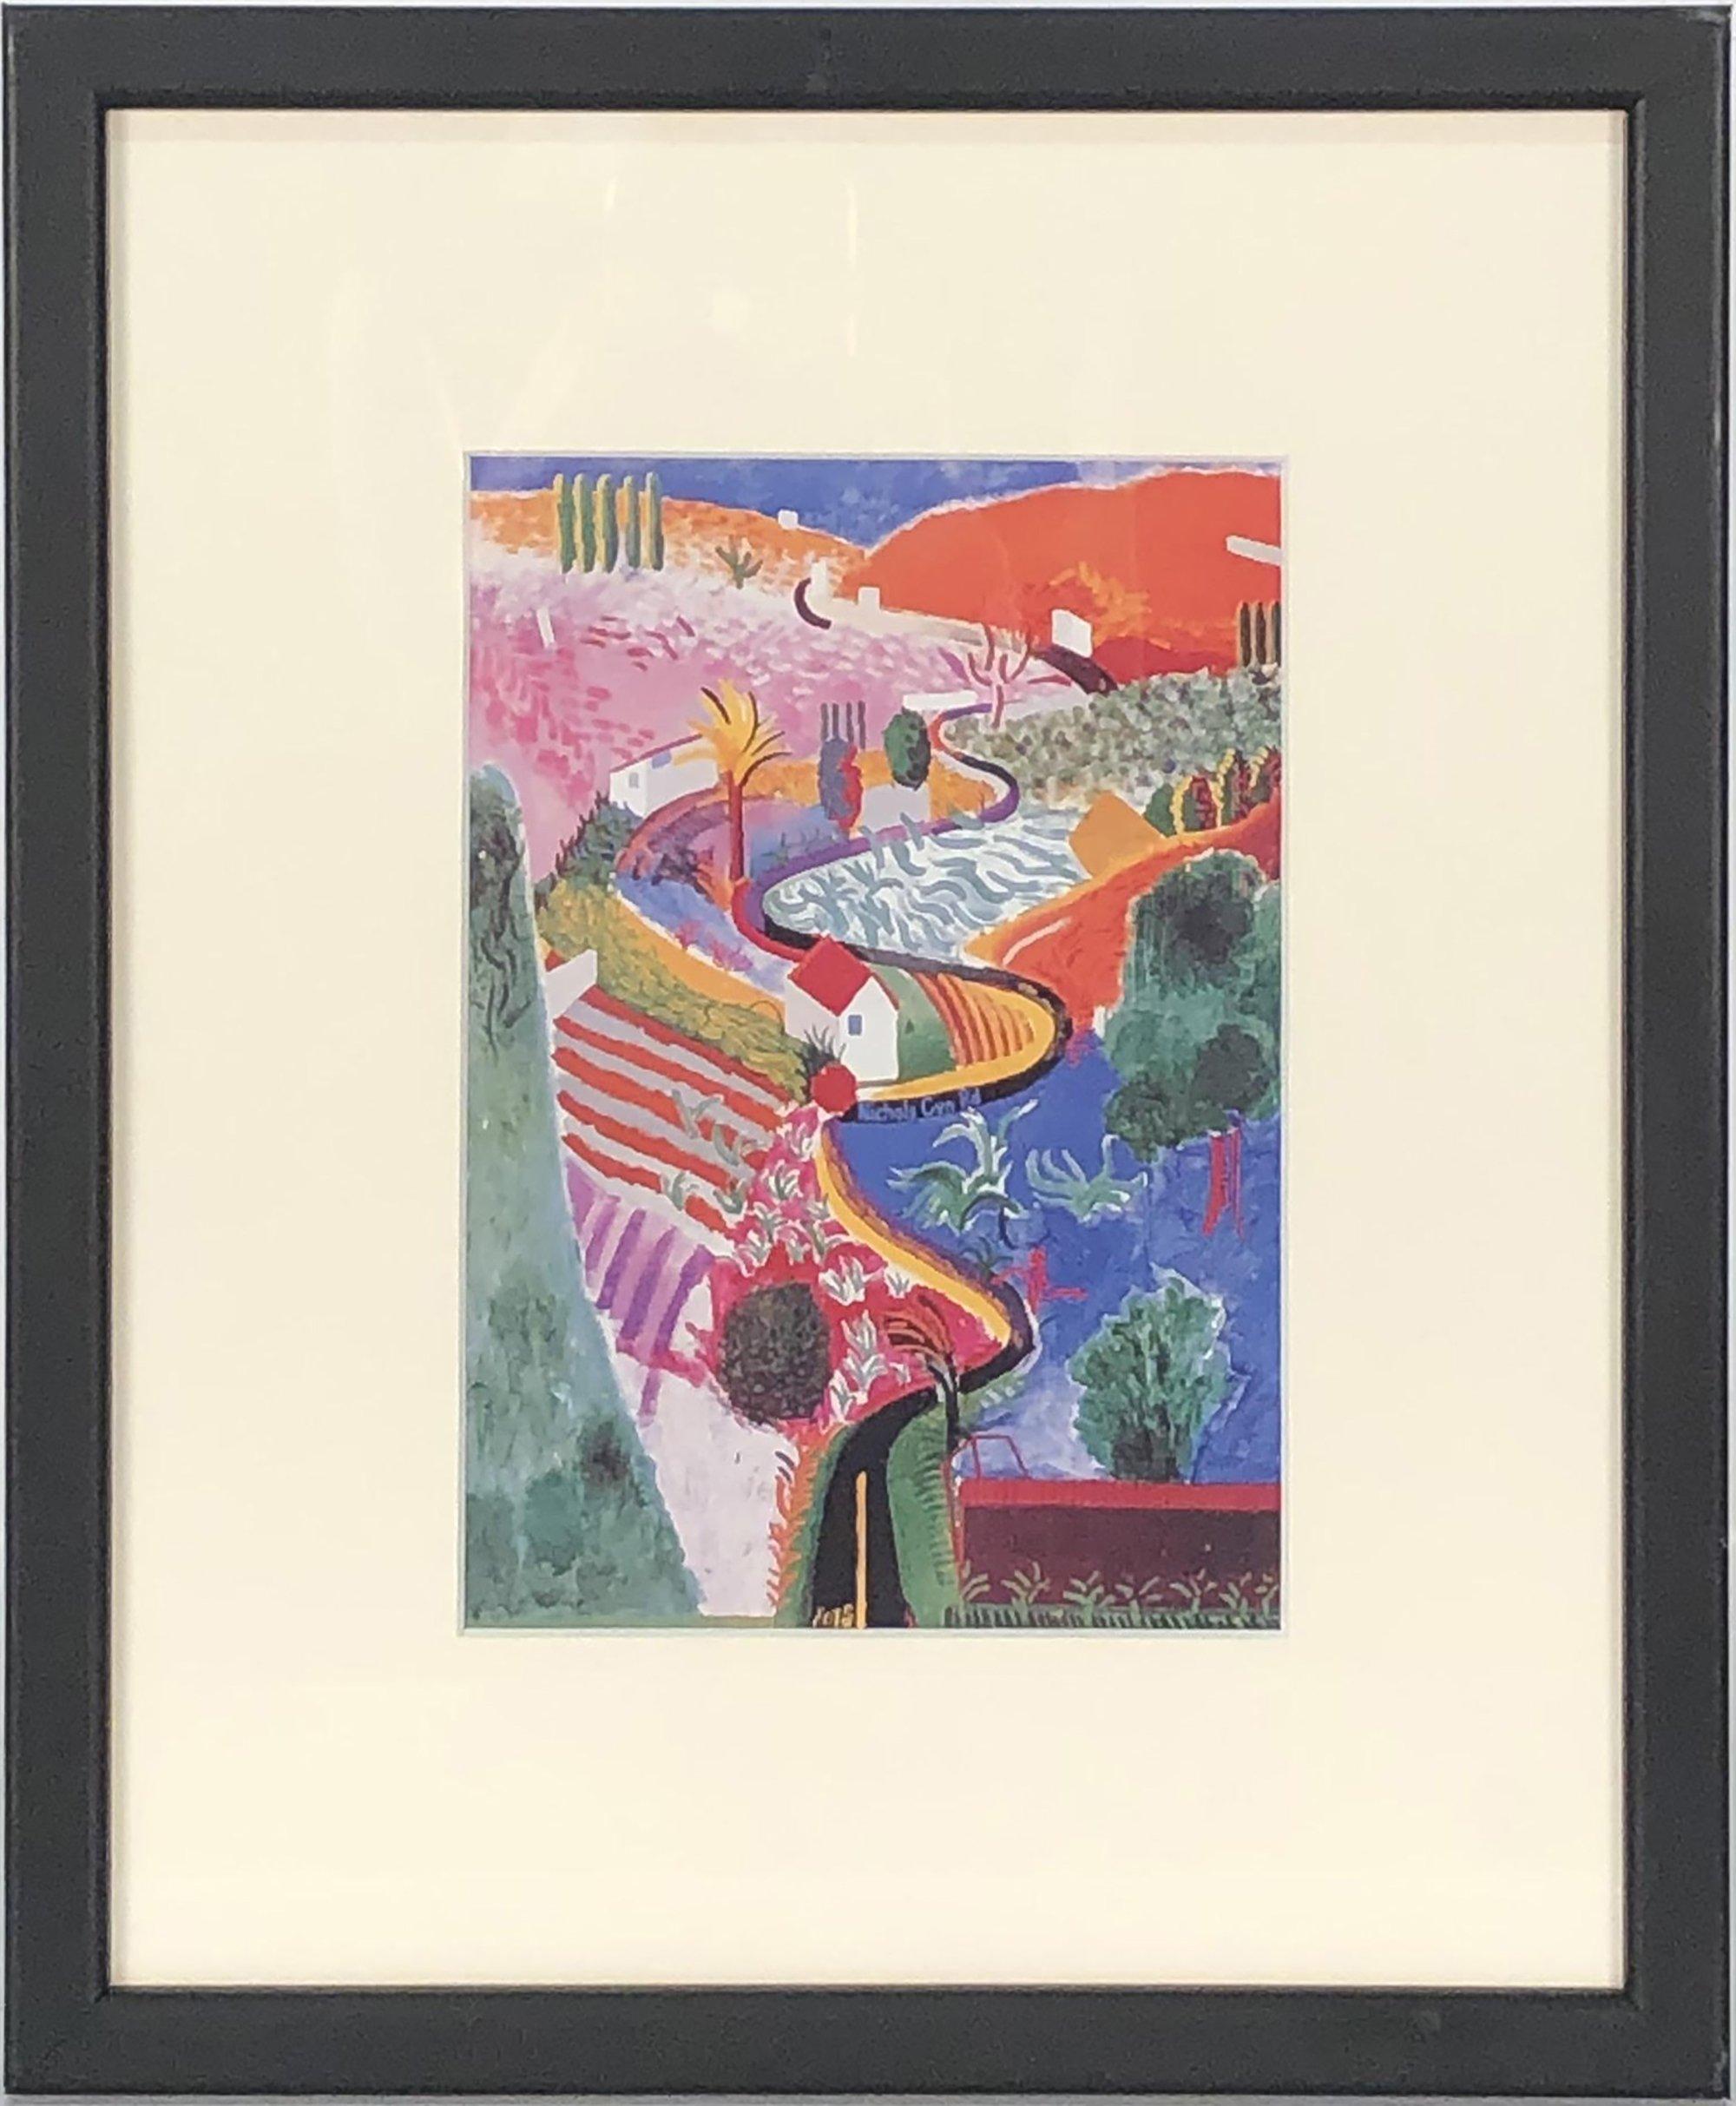 Paper Size: 11.5 x 9.5 inches ( 29.21 x 24.13 cm )
 Image Size: 6.5 x 4.5 inches ( 16.51 x 11.43 cm )
 Framed: Yes
 Condition: A-: Near Mint, very light signs of handling
 
 Additional Details: Framed and matted in a black wood frame with glass with